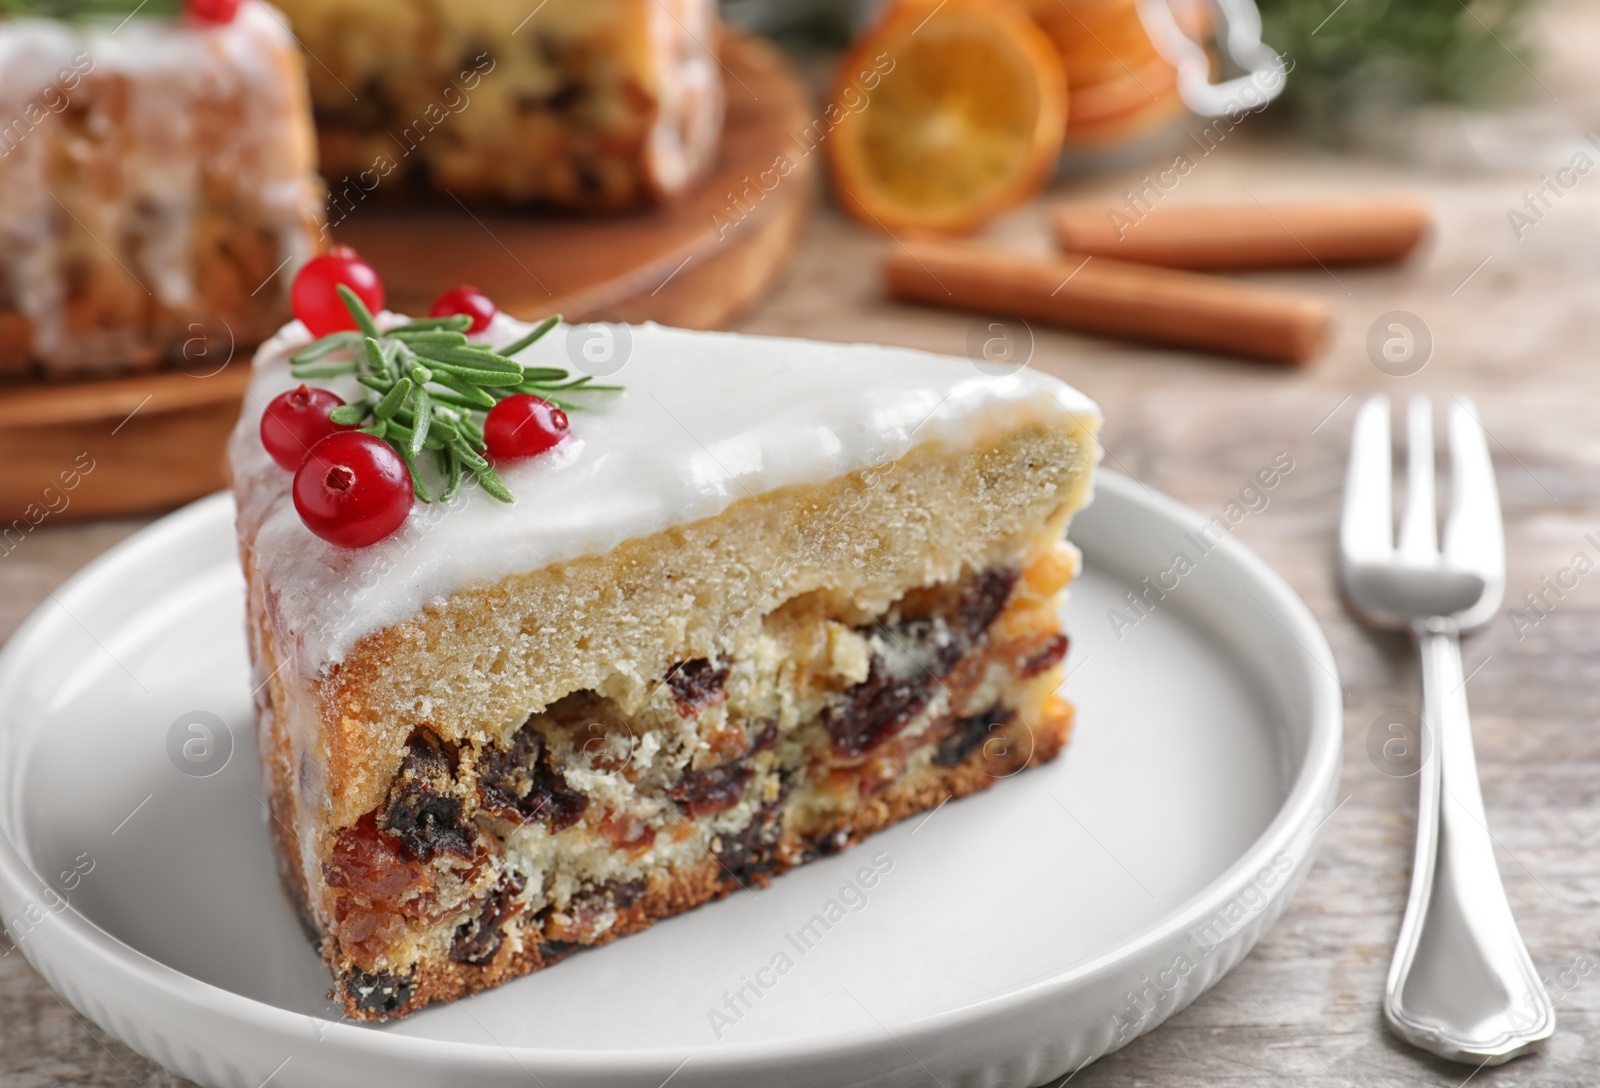 Photo of Slice of traditional Christmas cake decorated with rosemary and cranberries on table, closeup